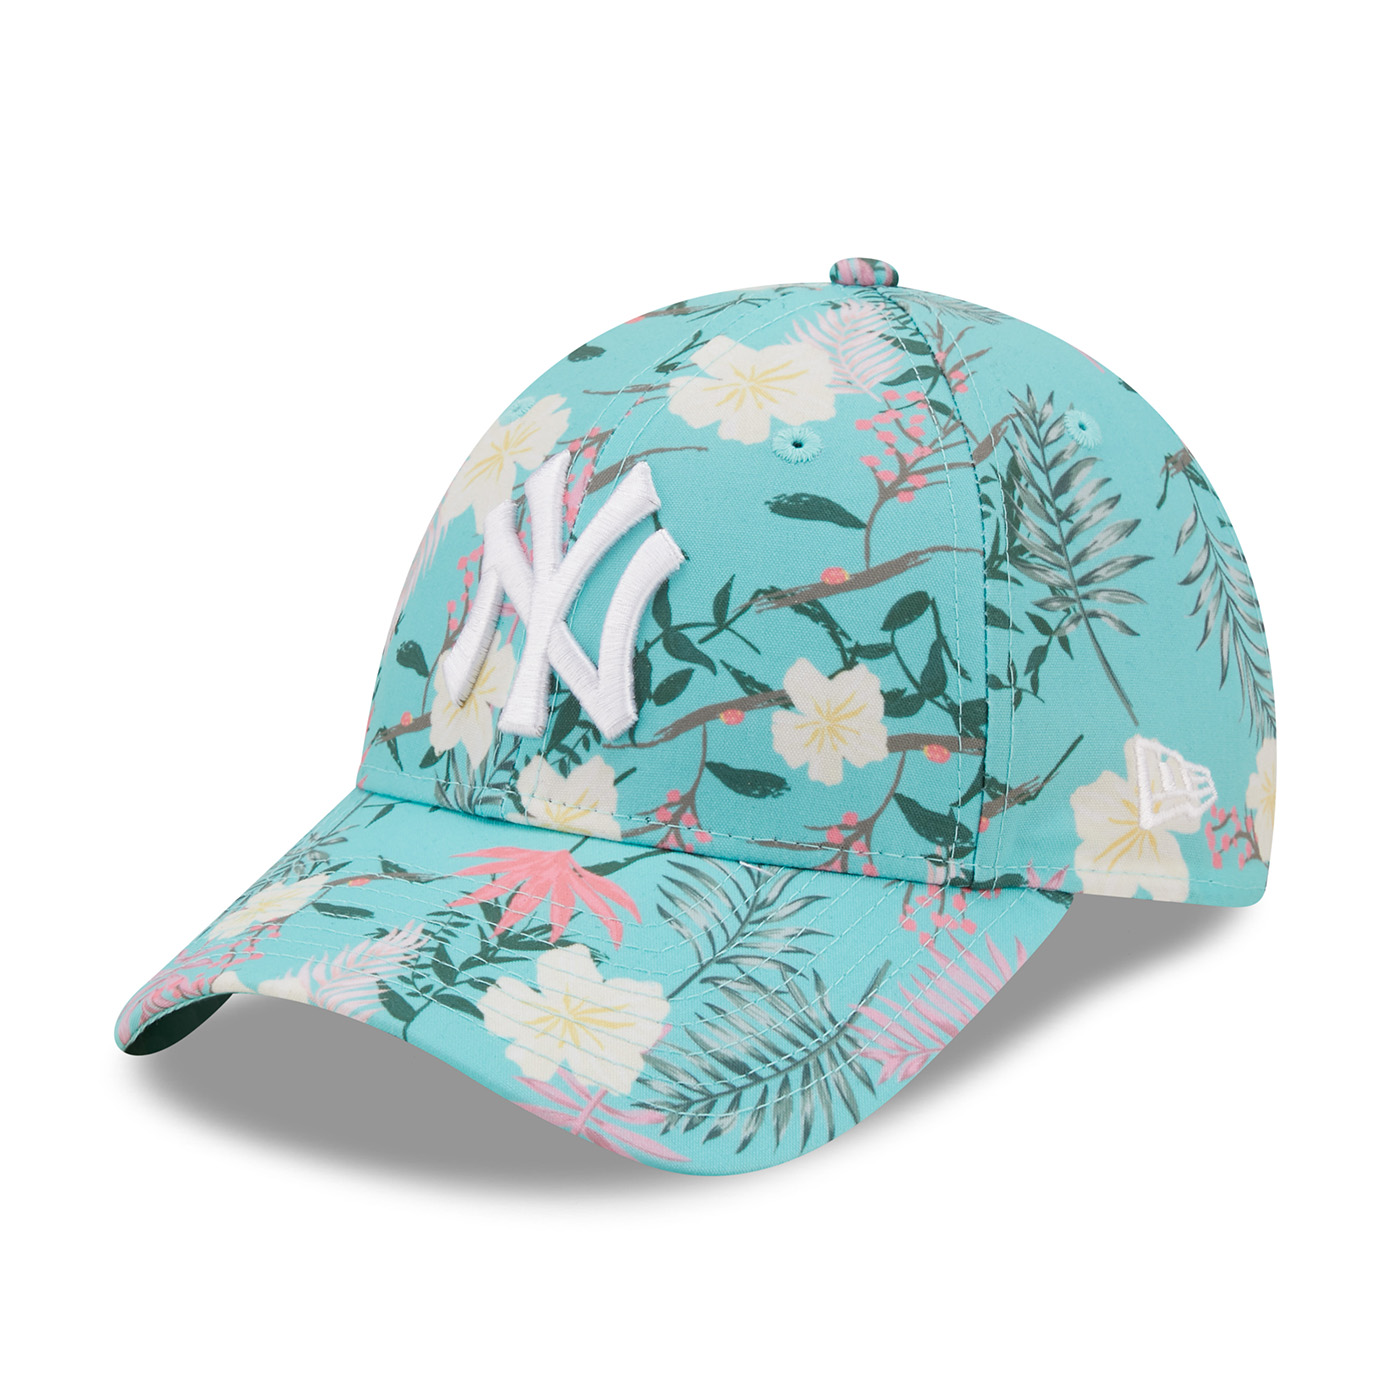 New Era Women 9FORTY New York Yankees Cap Blue / Turquoise Floral